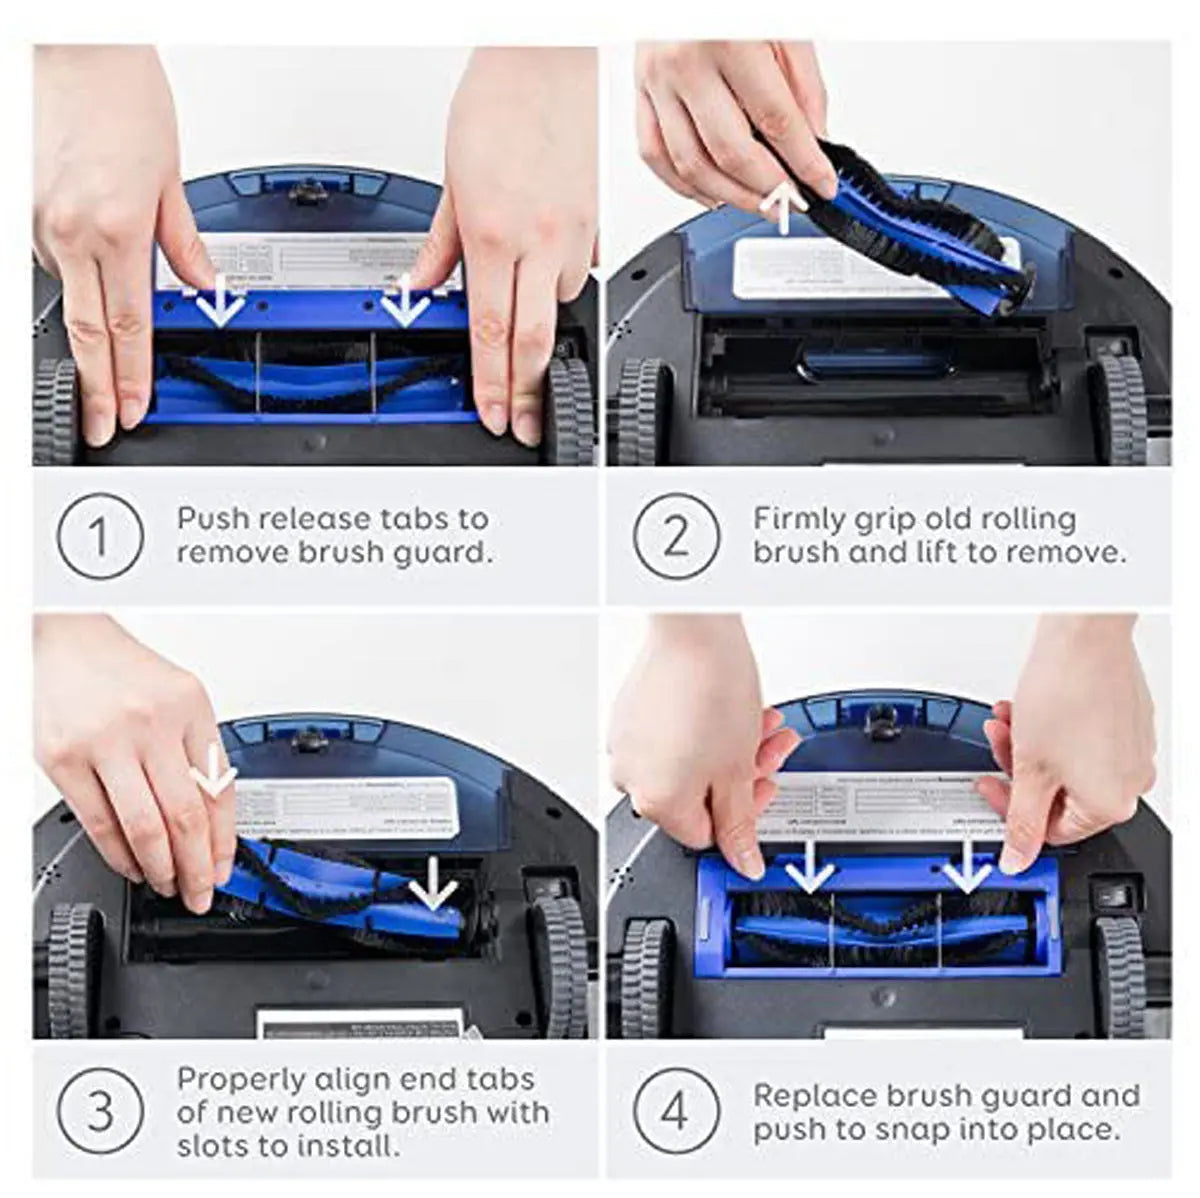 Anker Eufy RoboVac Replacement Accessories Kit Filter Set / Brush Guard / Rolling Brush / Side Brush for 11S Max, 15C Max, 30C Max, G20, G30, G30 Edge (T2916) Anker Singapore